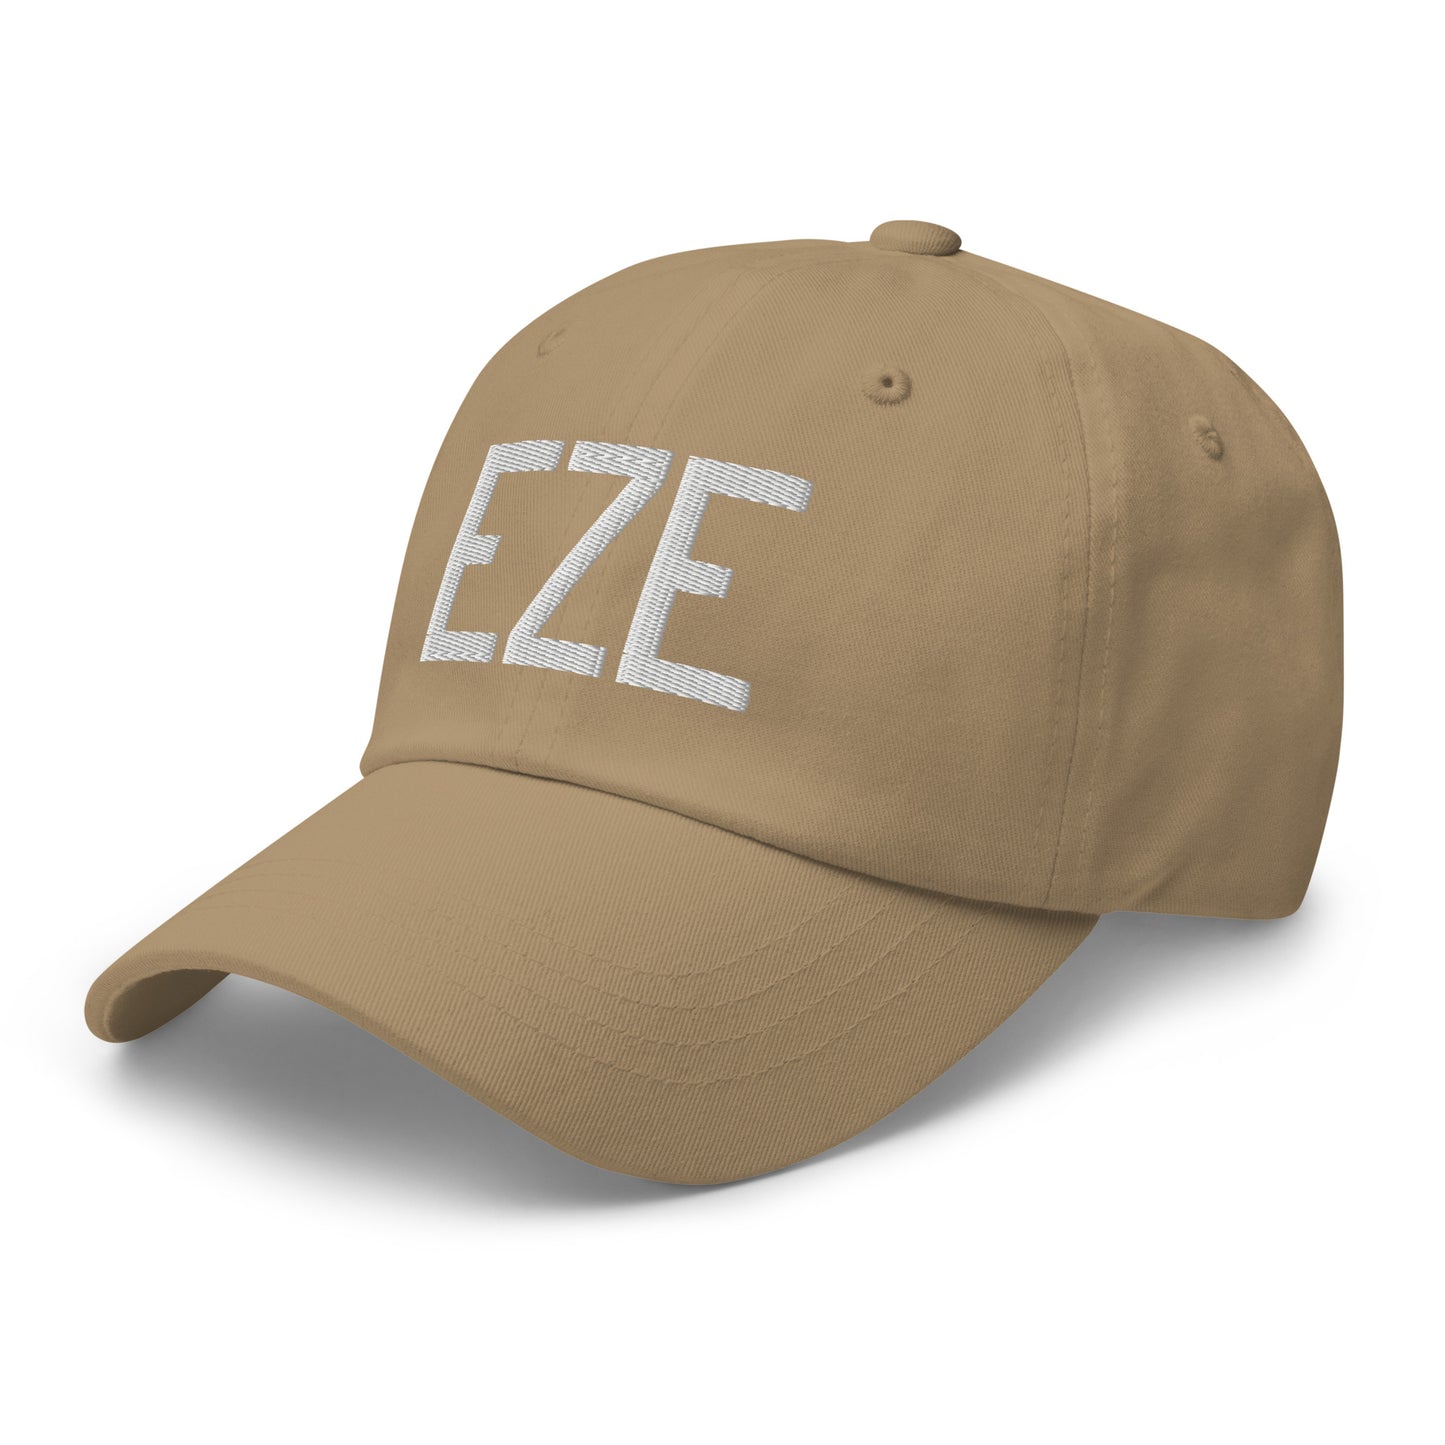 Airport Code Baseball Cap - White • EZE Buenos Aires • YHM Designs - Image 24